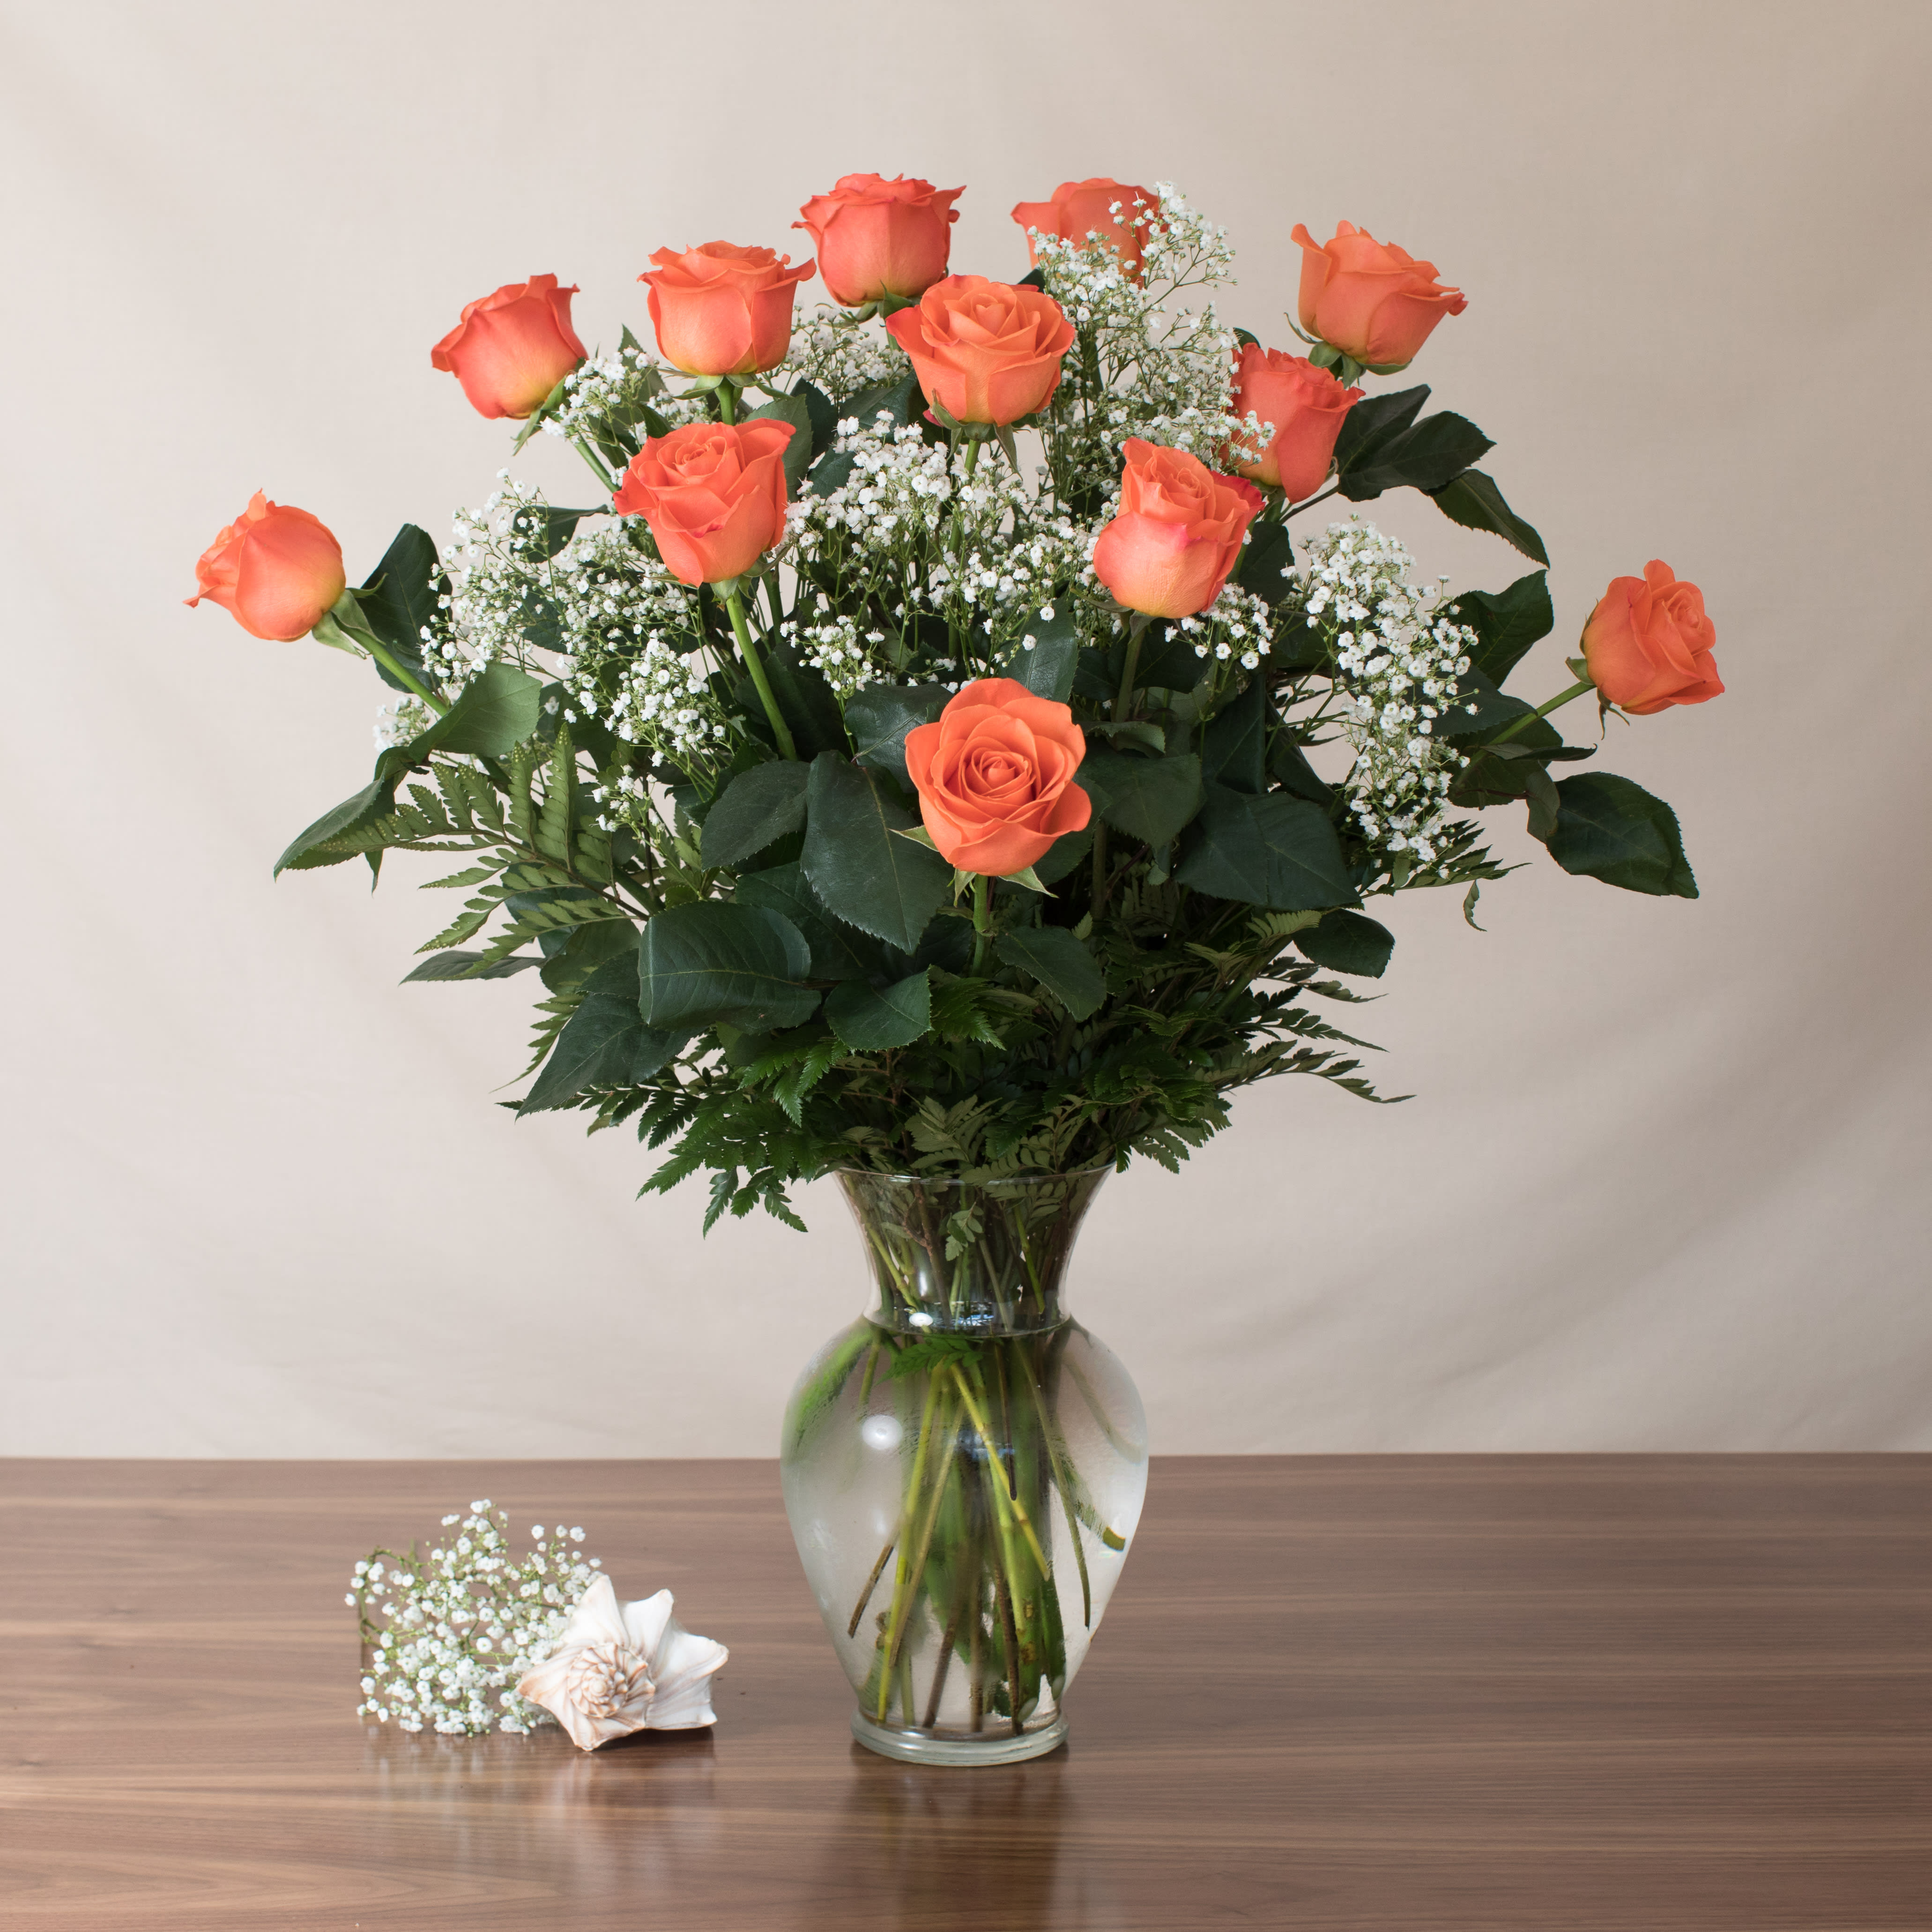 Orange Rose Masterpiece - Gorgeous Orange roses, one dozen long, with fillers and greens.  Brighten up someone's day!  